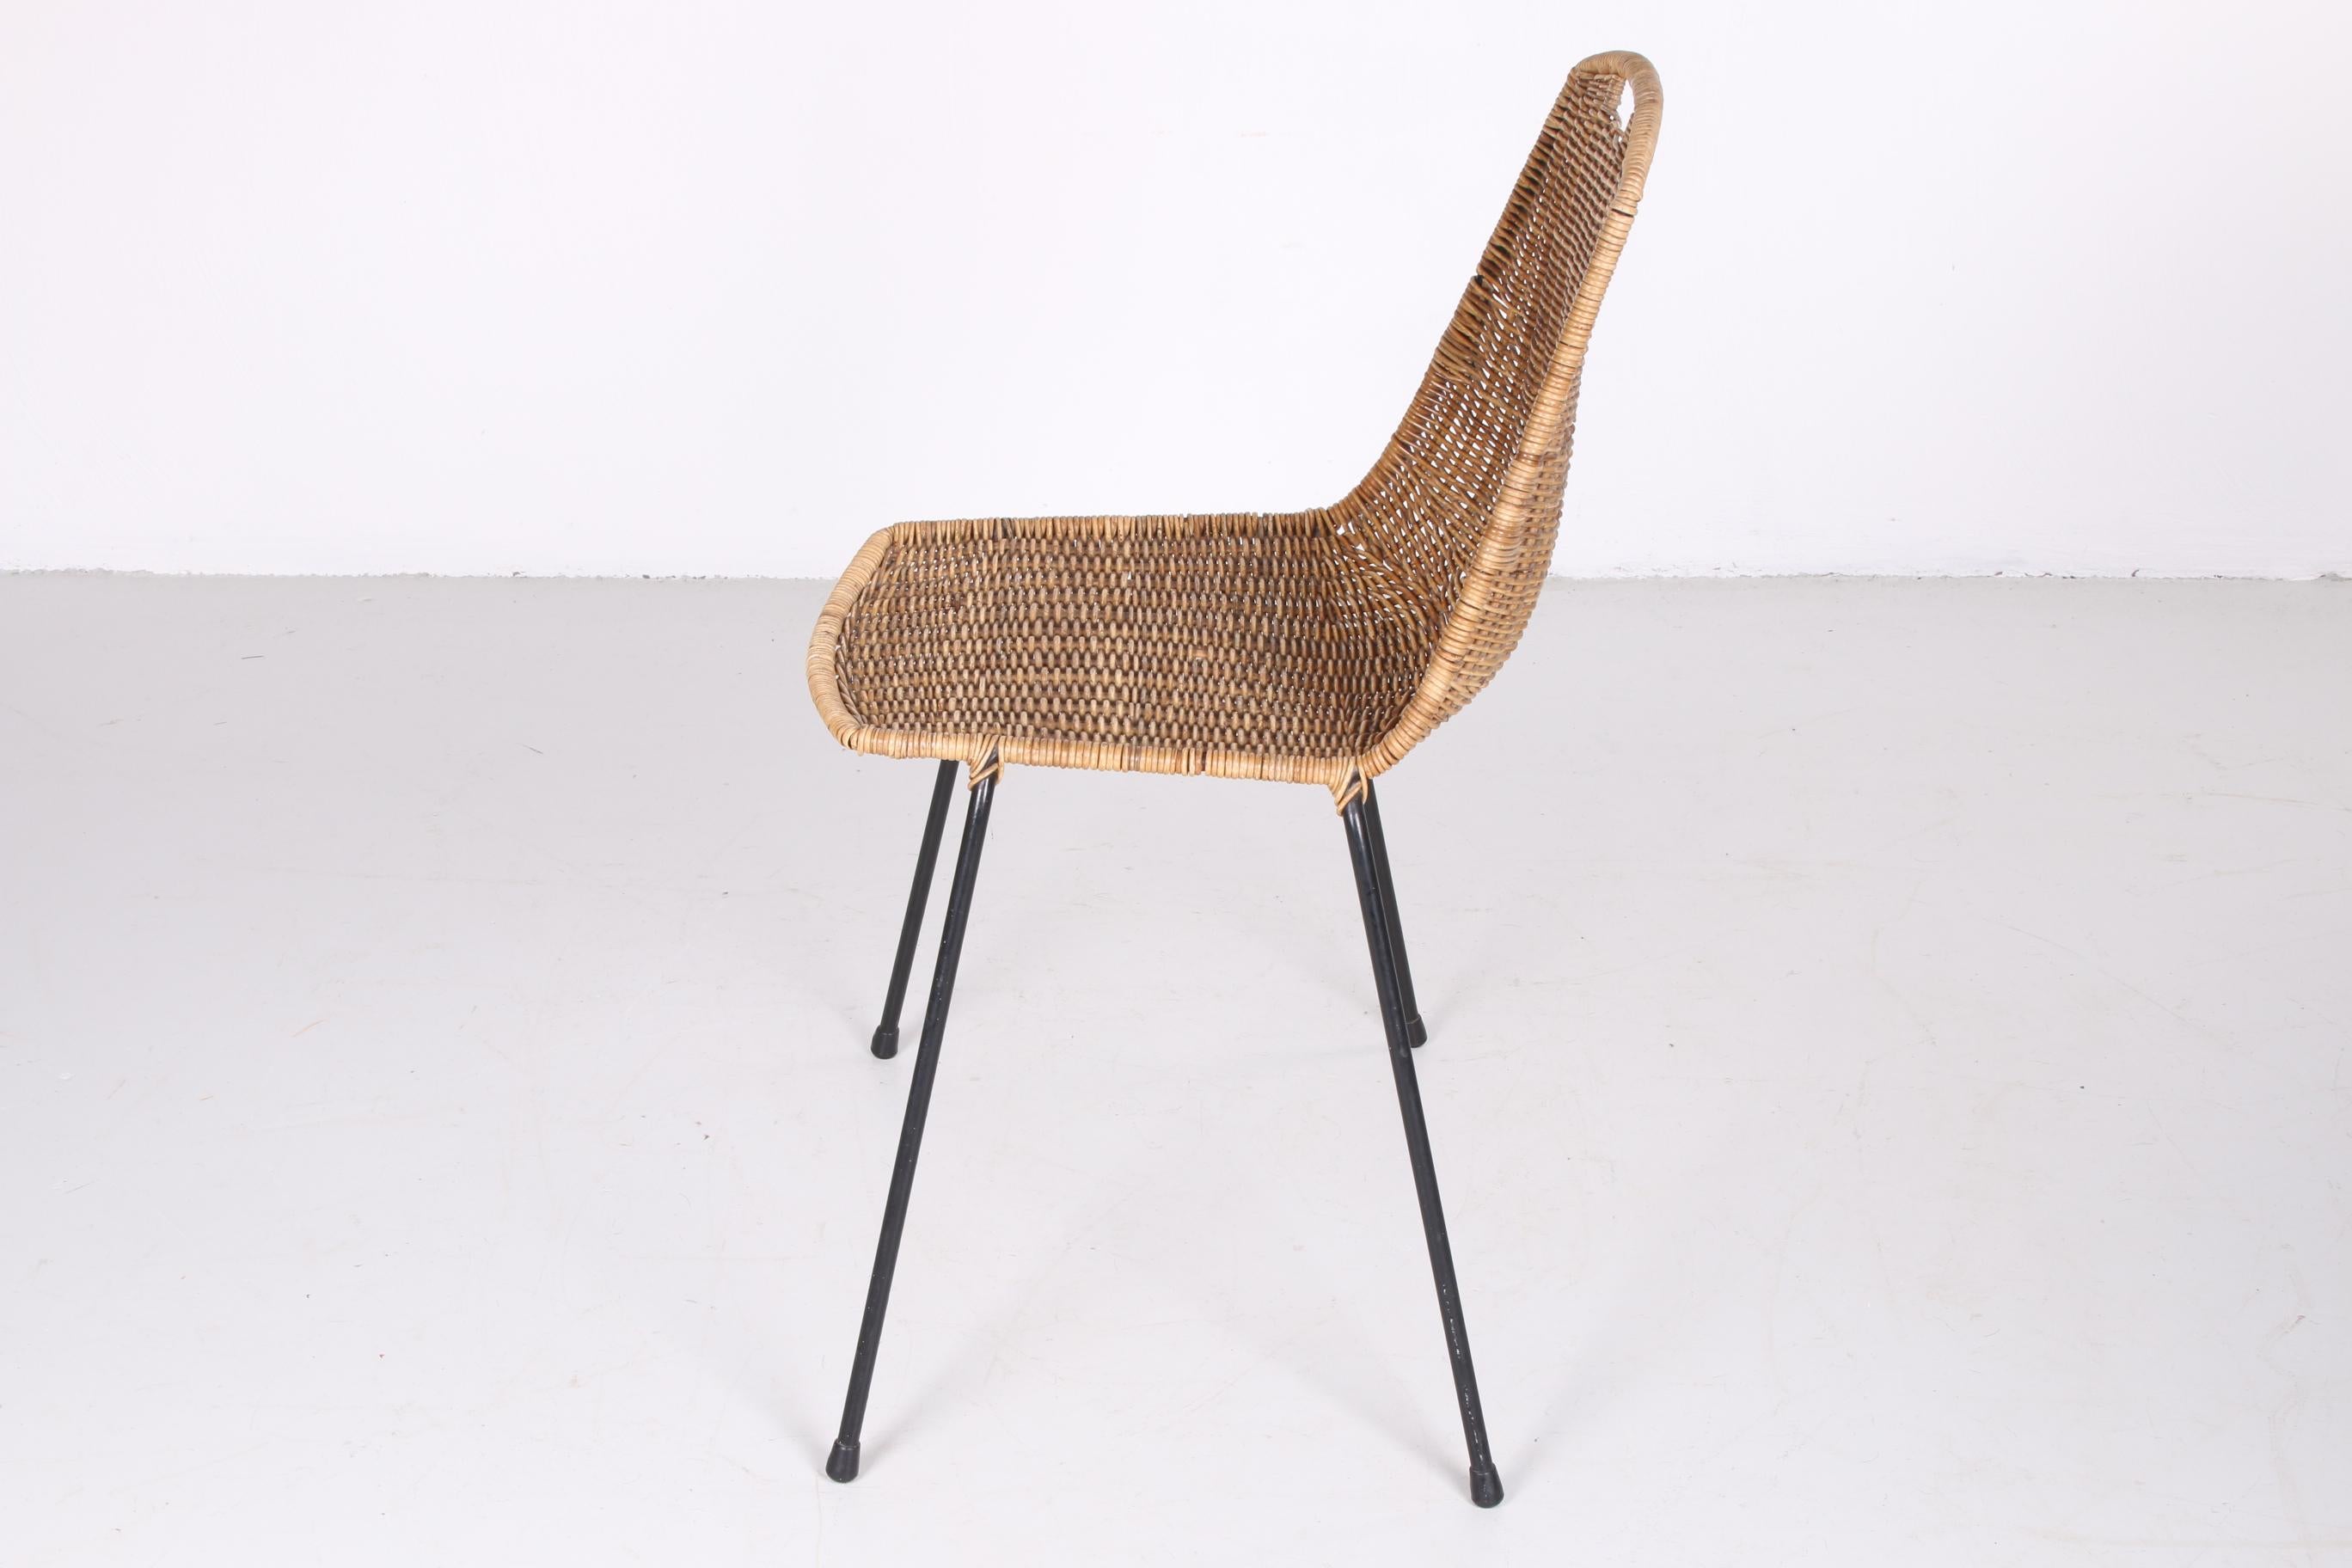 Vintage Wicker Dining Table Chair with Black Metal Legs 2